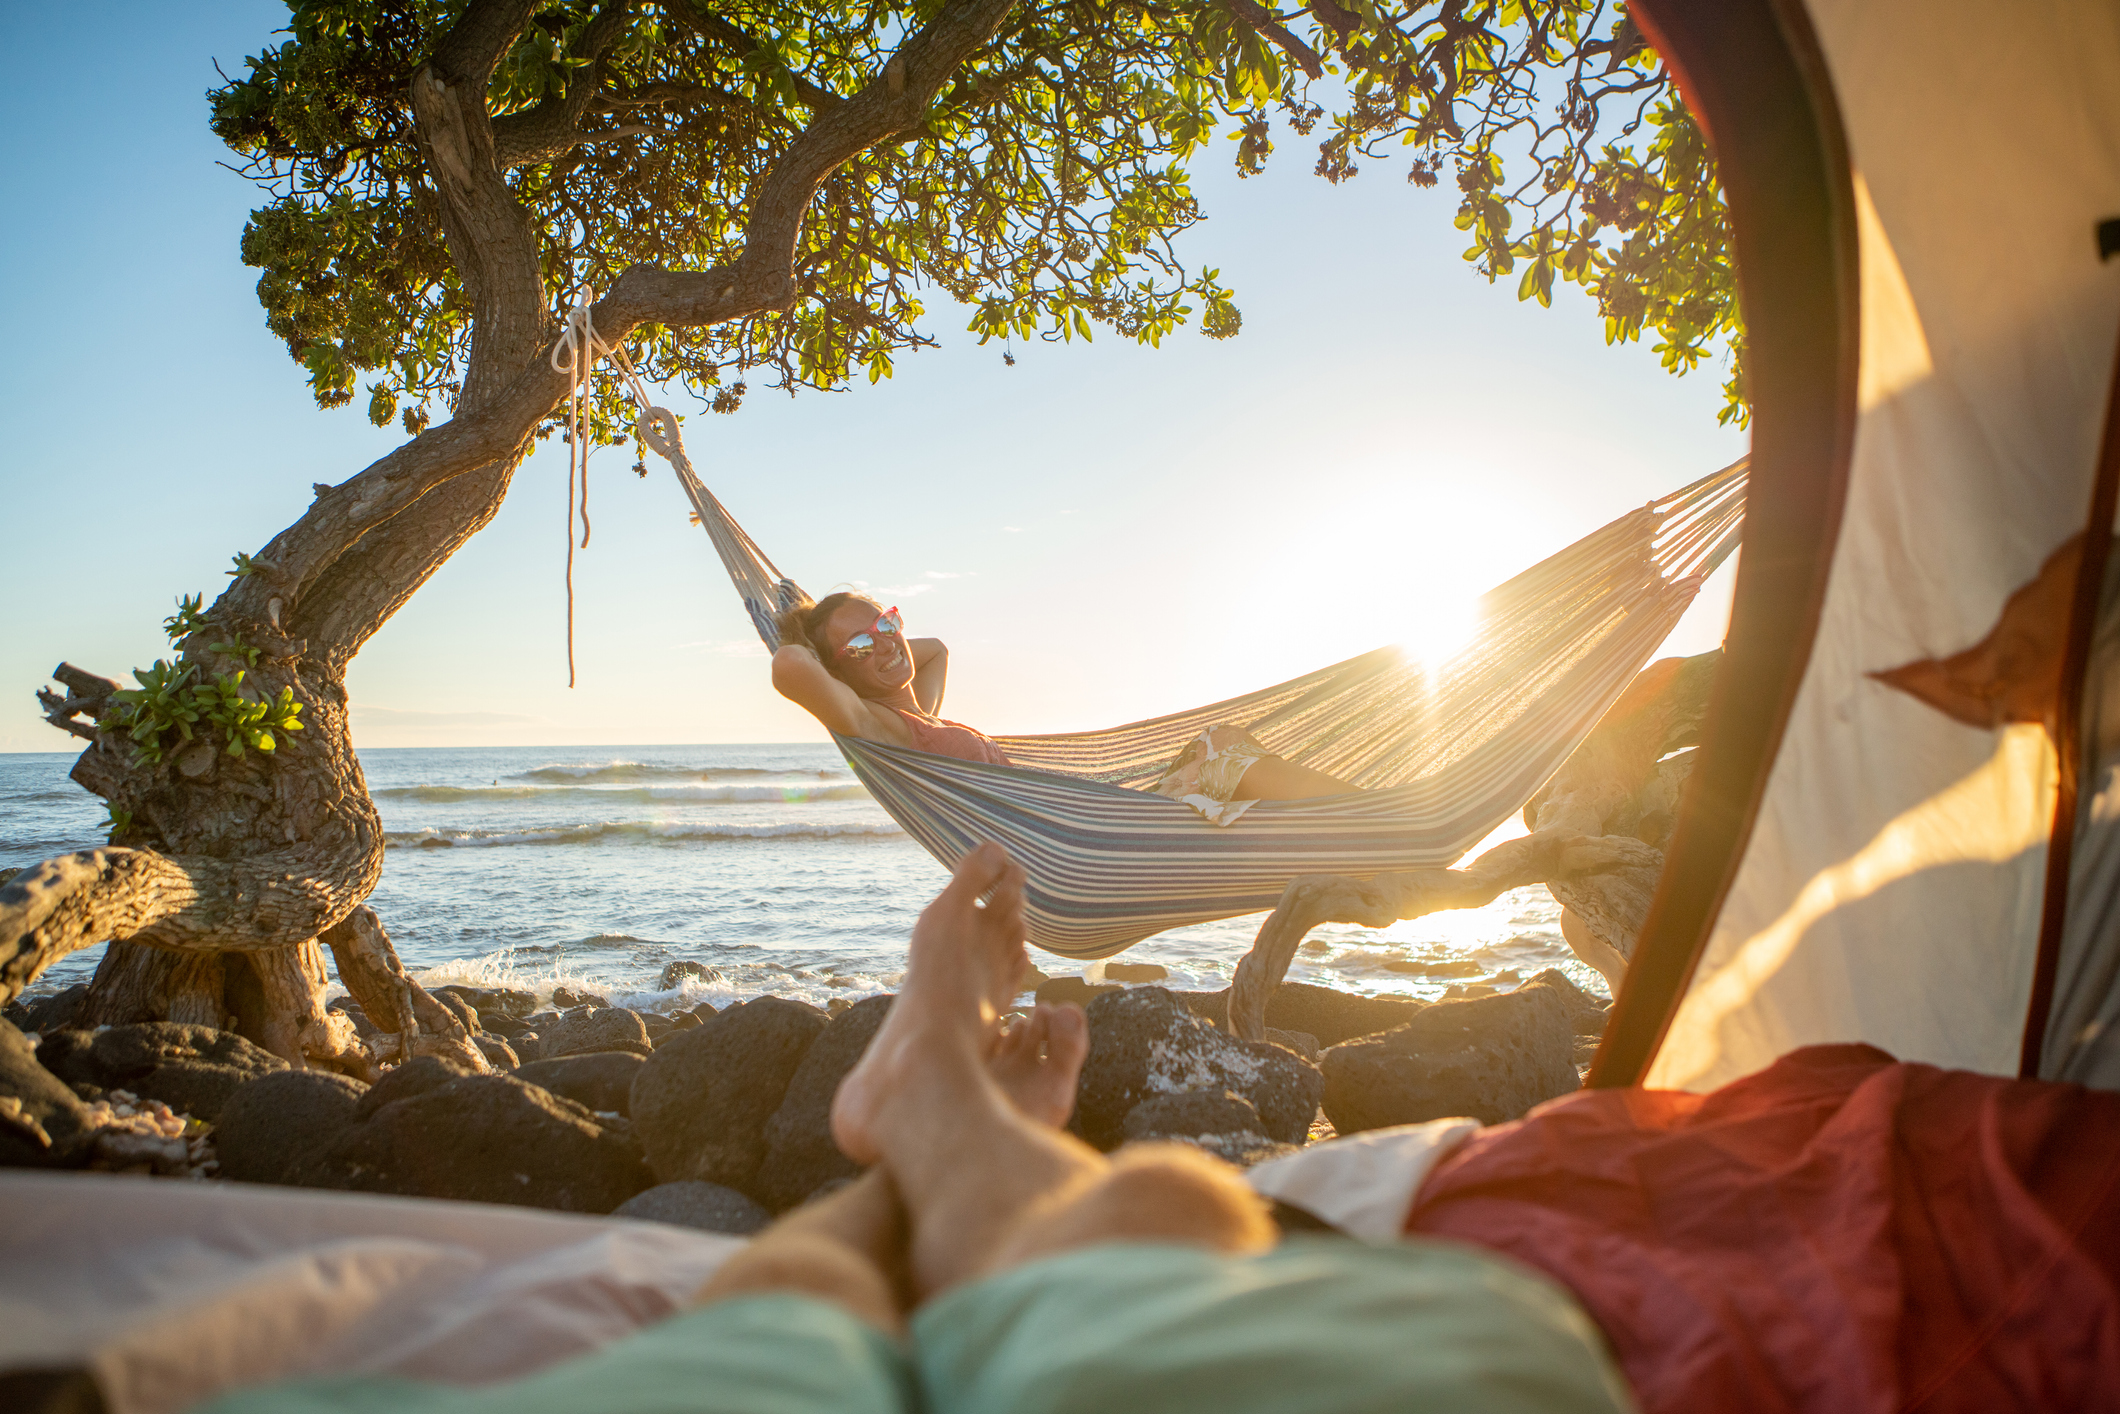 This photo is taken from the perspective of someone lying on the ground inside a tent looking through the opening In the foreground you can see their legs crossed at the ankle They are looking at a woman relaxing in a hammock next to water